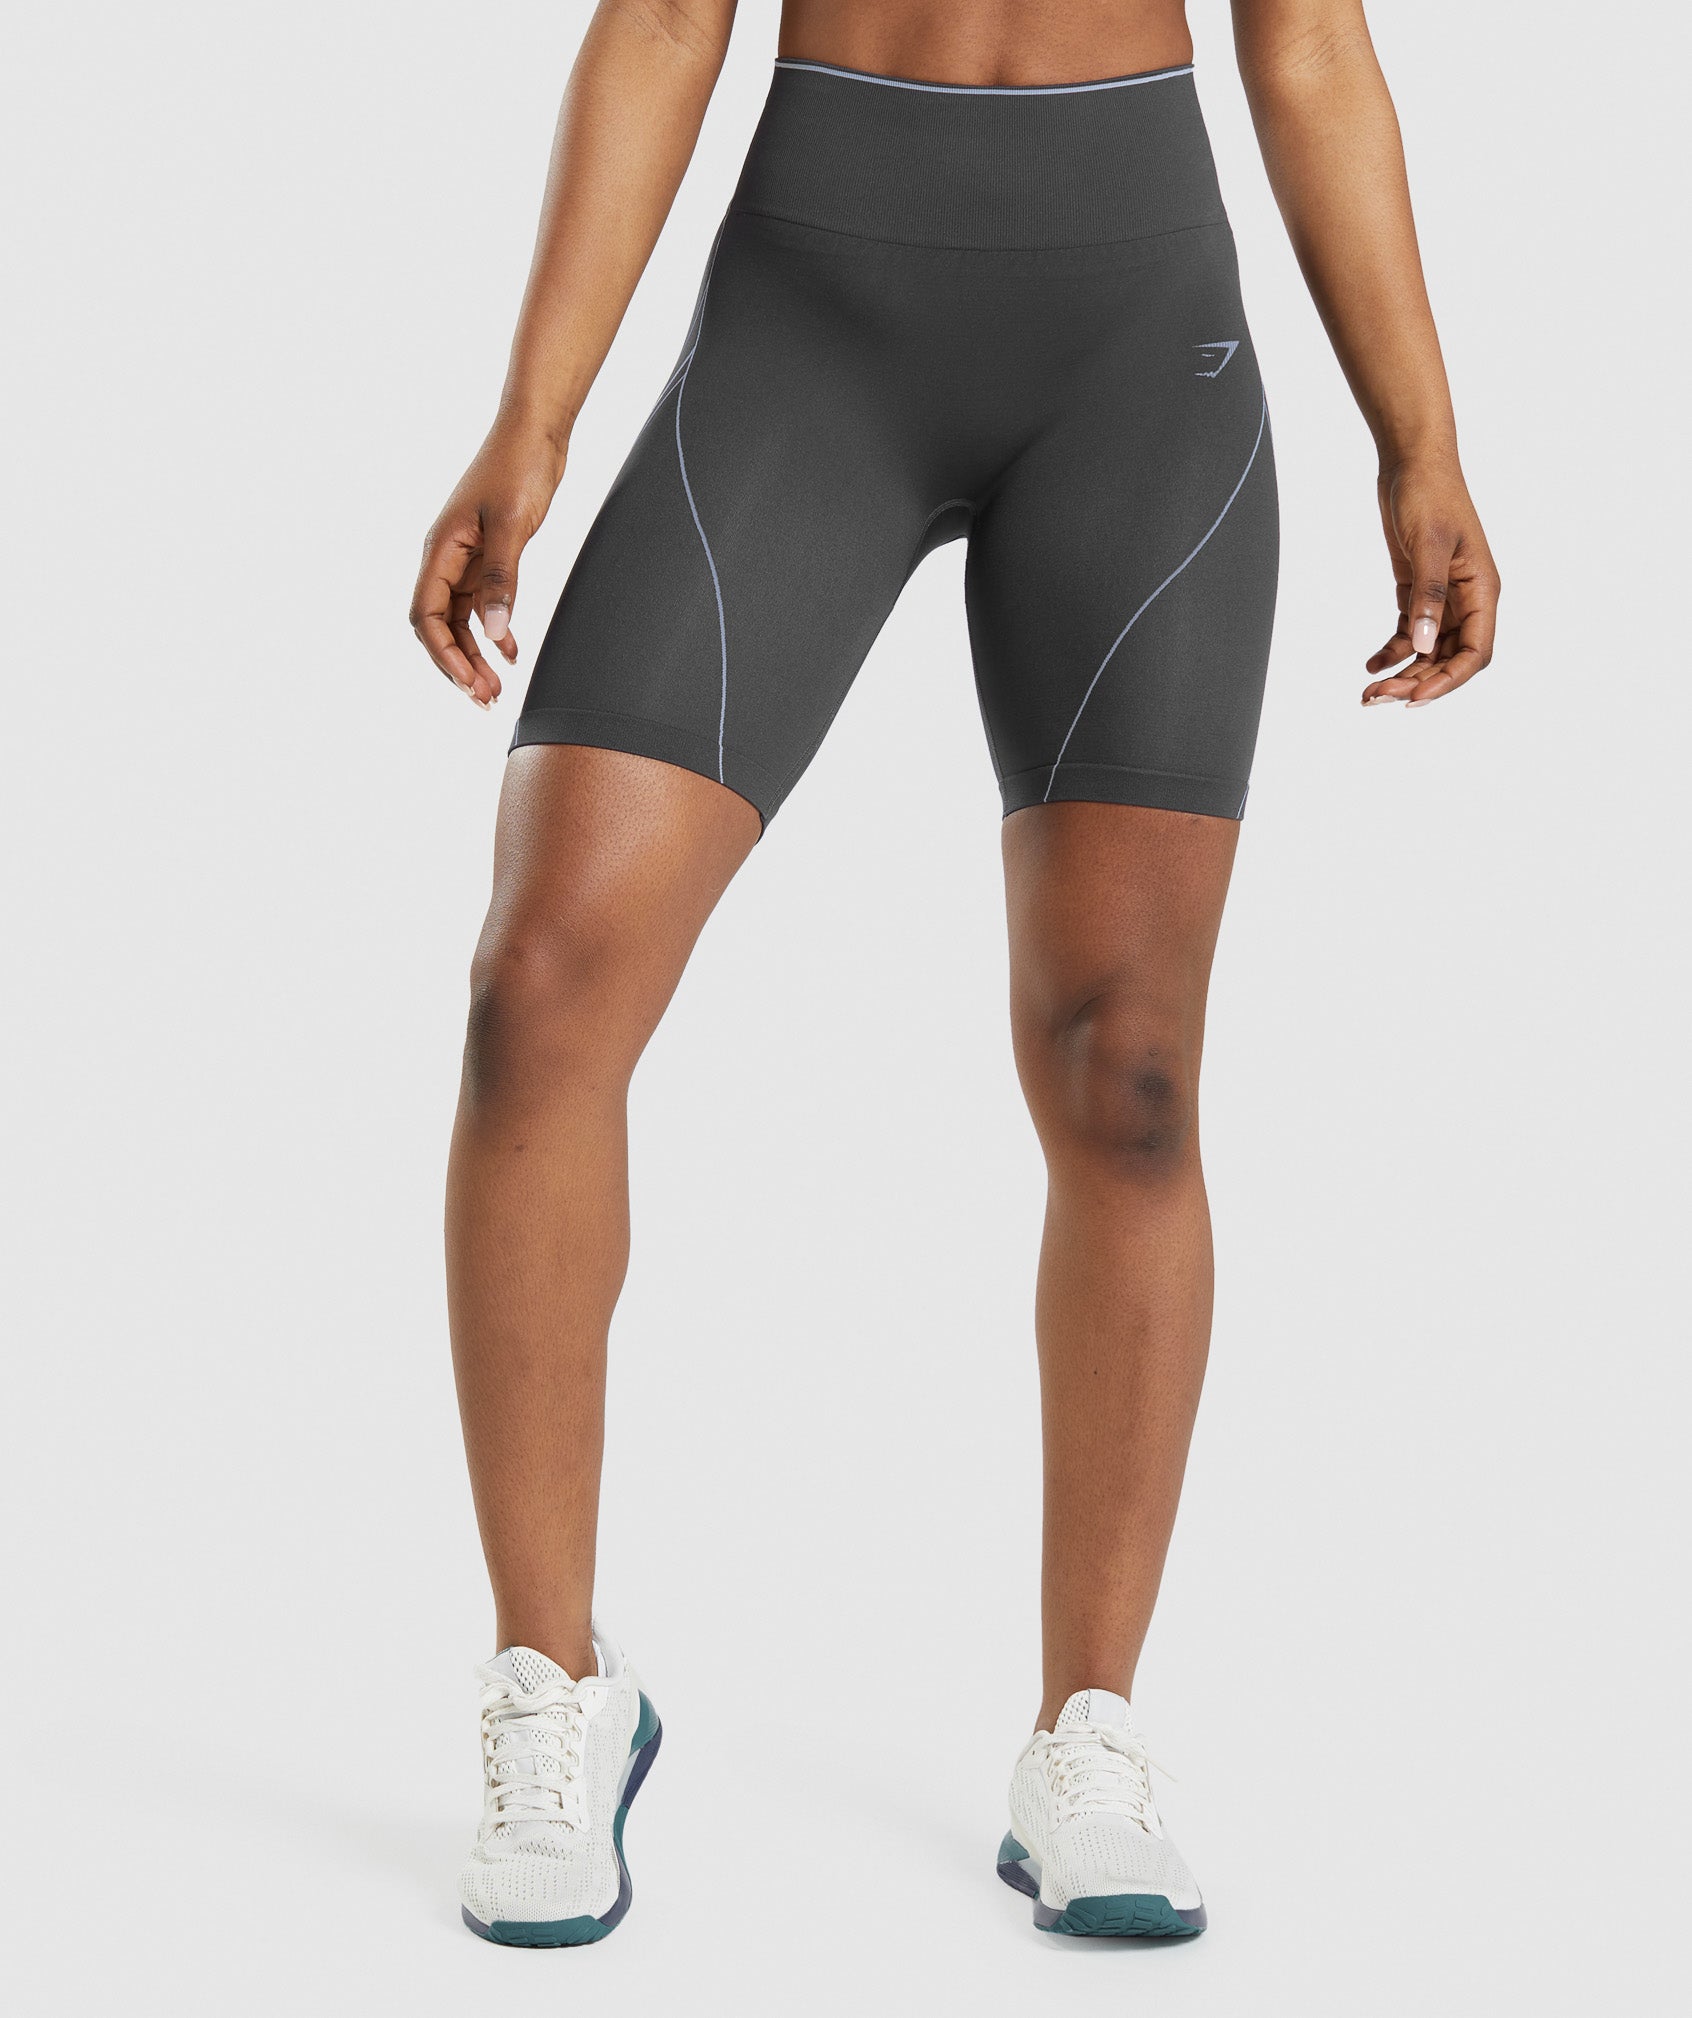 Apex Seamless High Rise Short in Onyx Grey/Lavender Blue - view 1